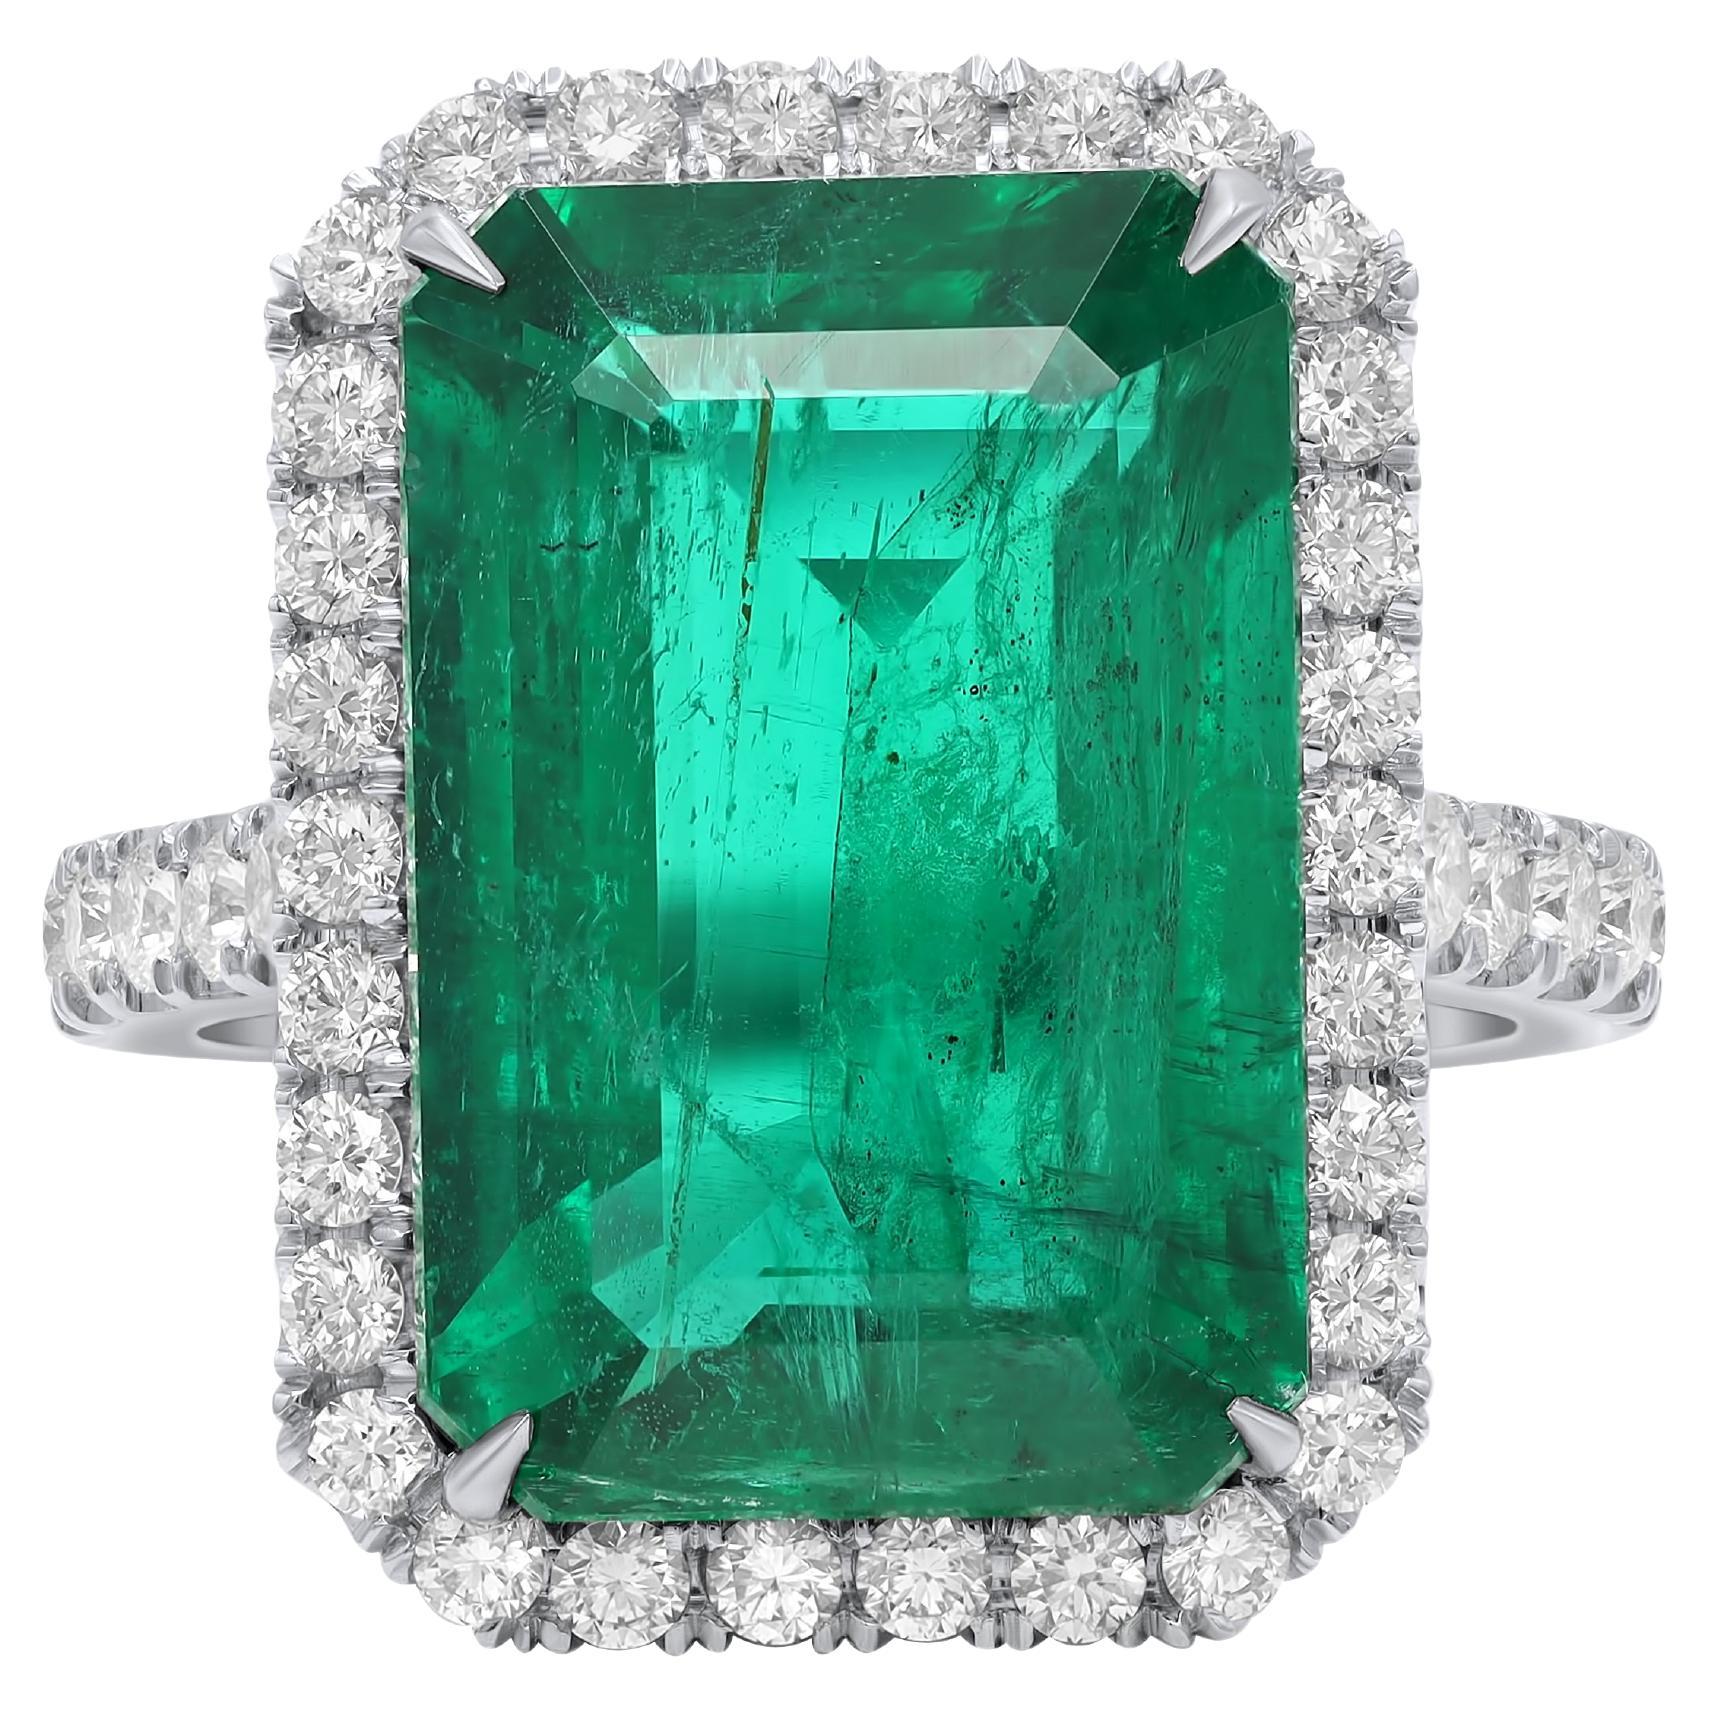 Diana M.Platinum emerald diamond ring featuring a 10.07 ct natural emerald  For Sale